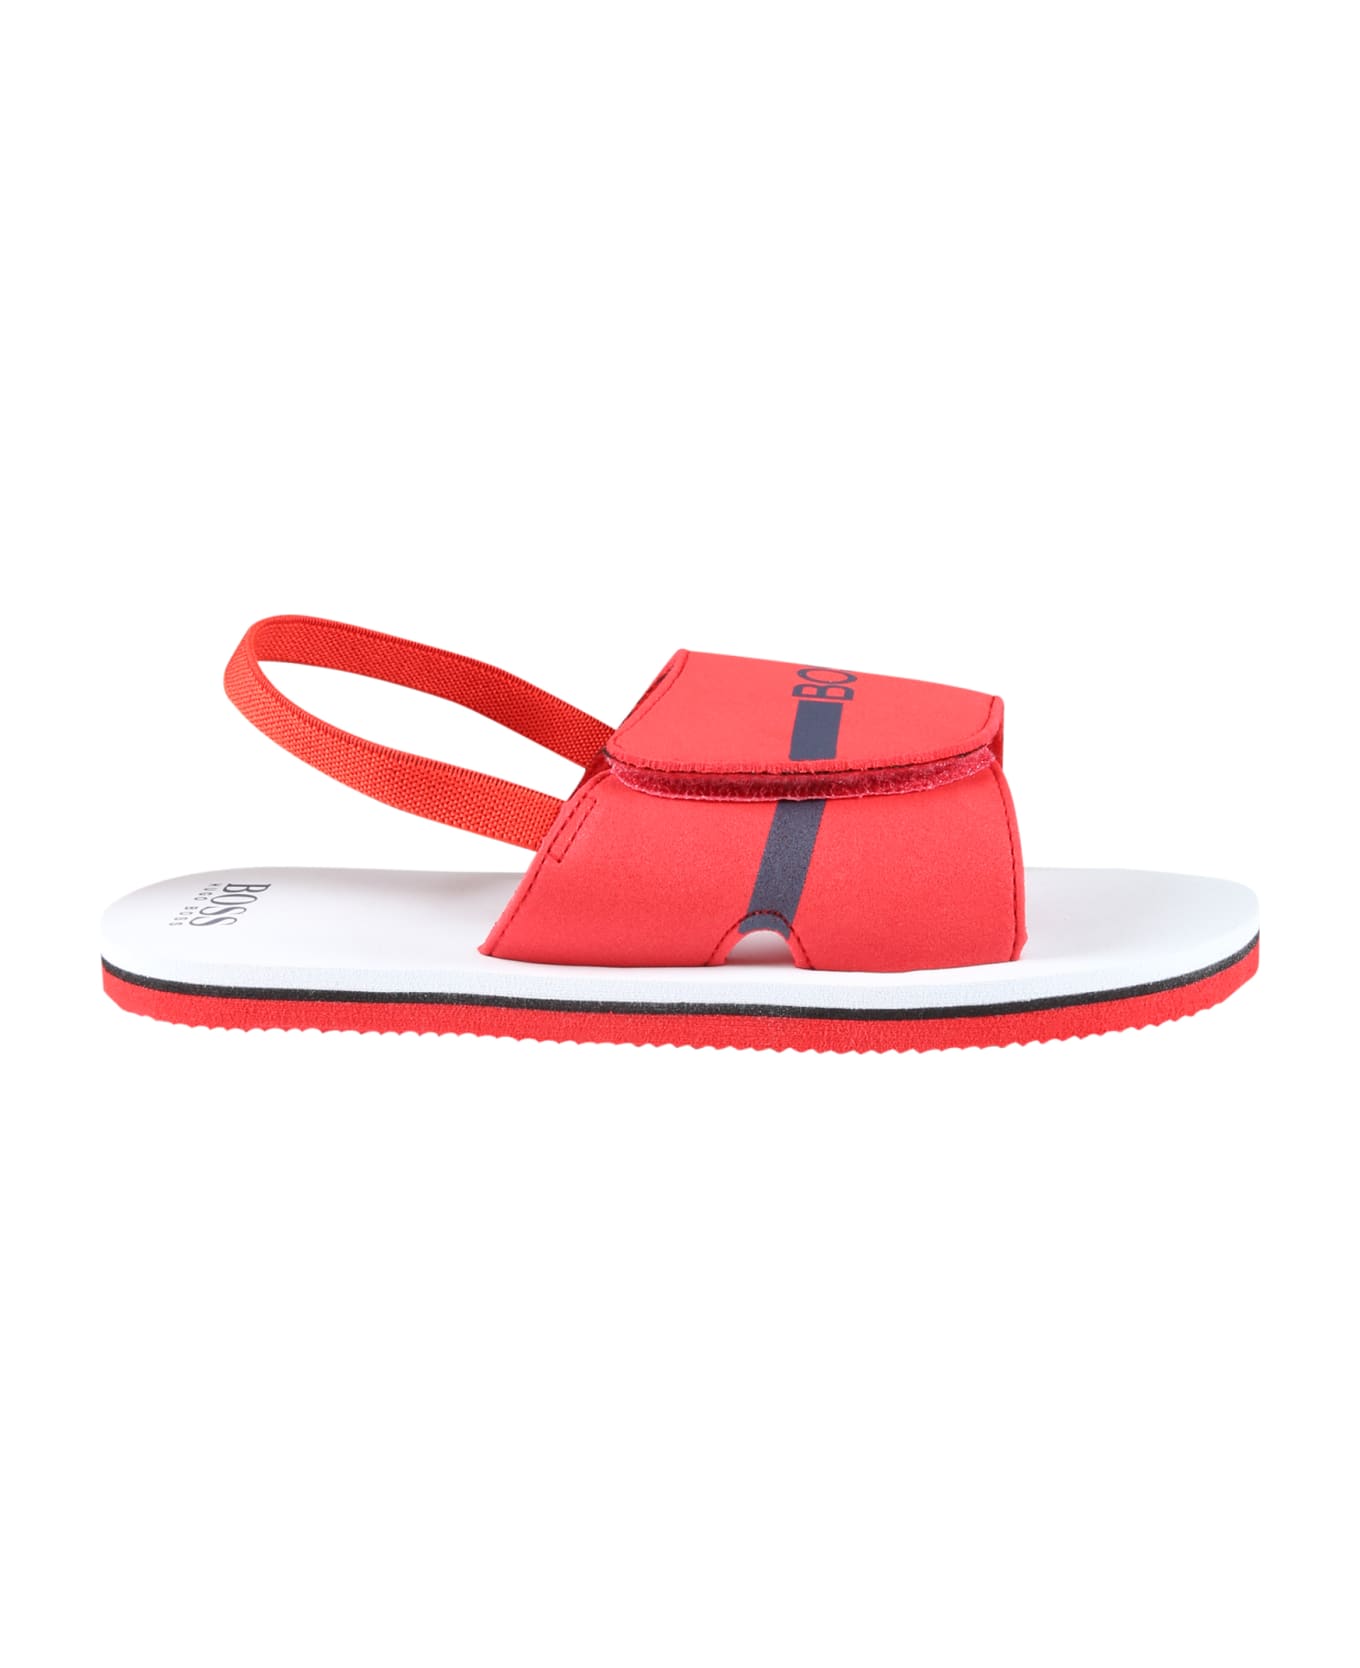 Hugo Boss Red Sandals For Boy With Blue Logo - Red